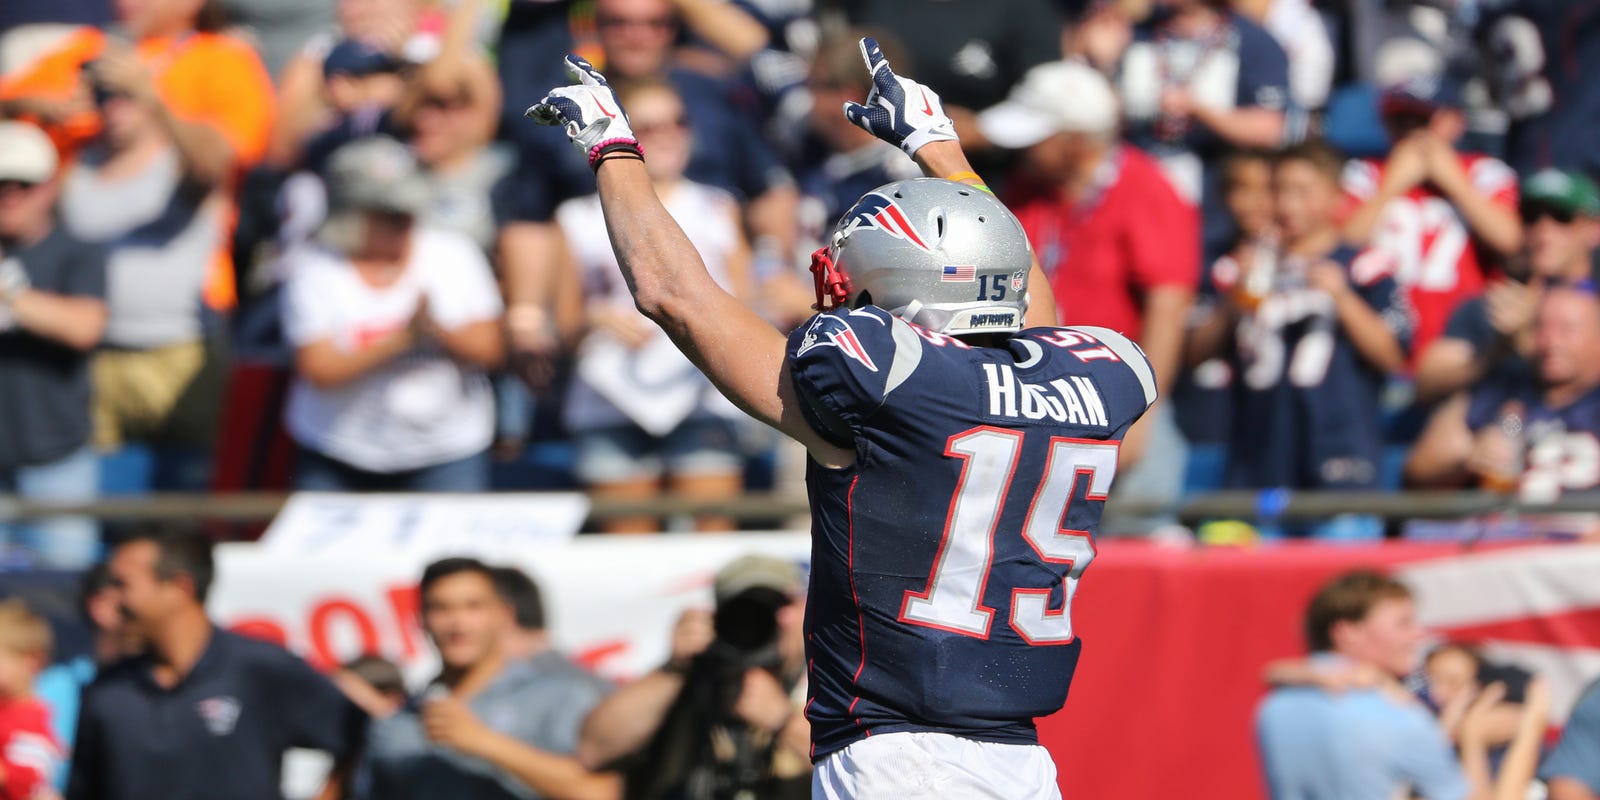 Super Bowl: Chris Hogan's chance to embrace another trophy